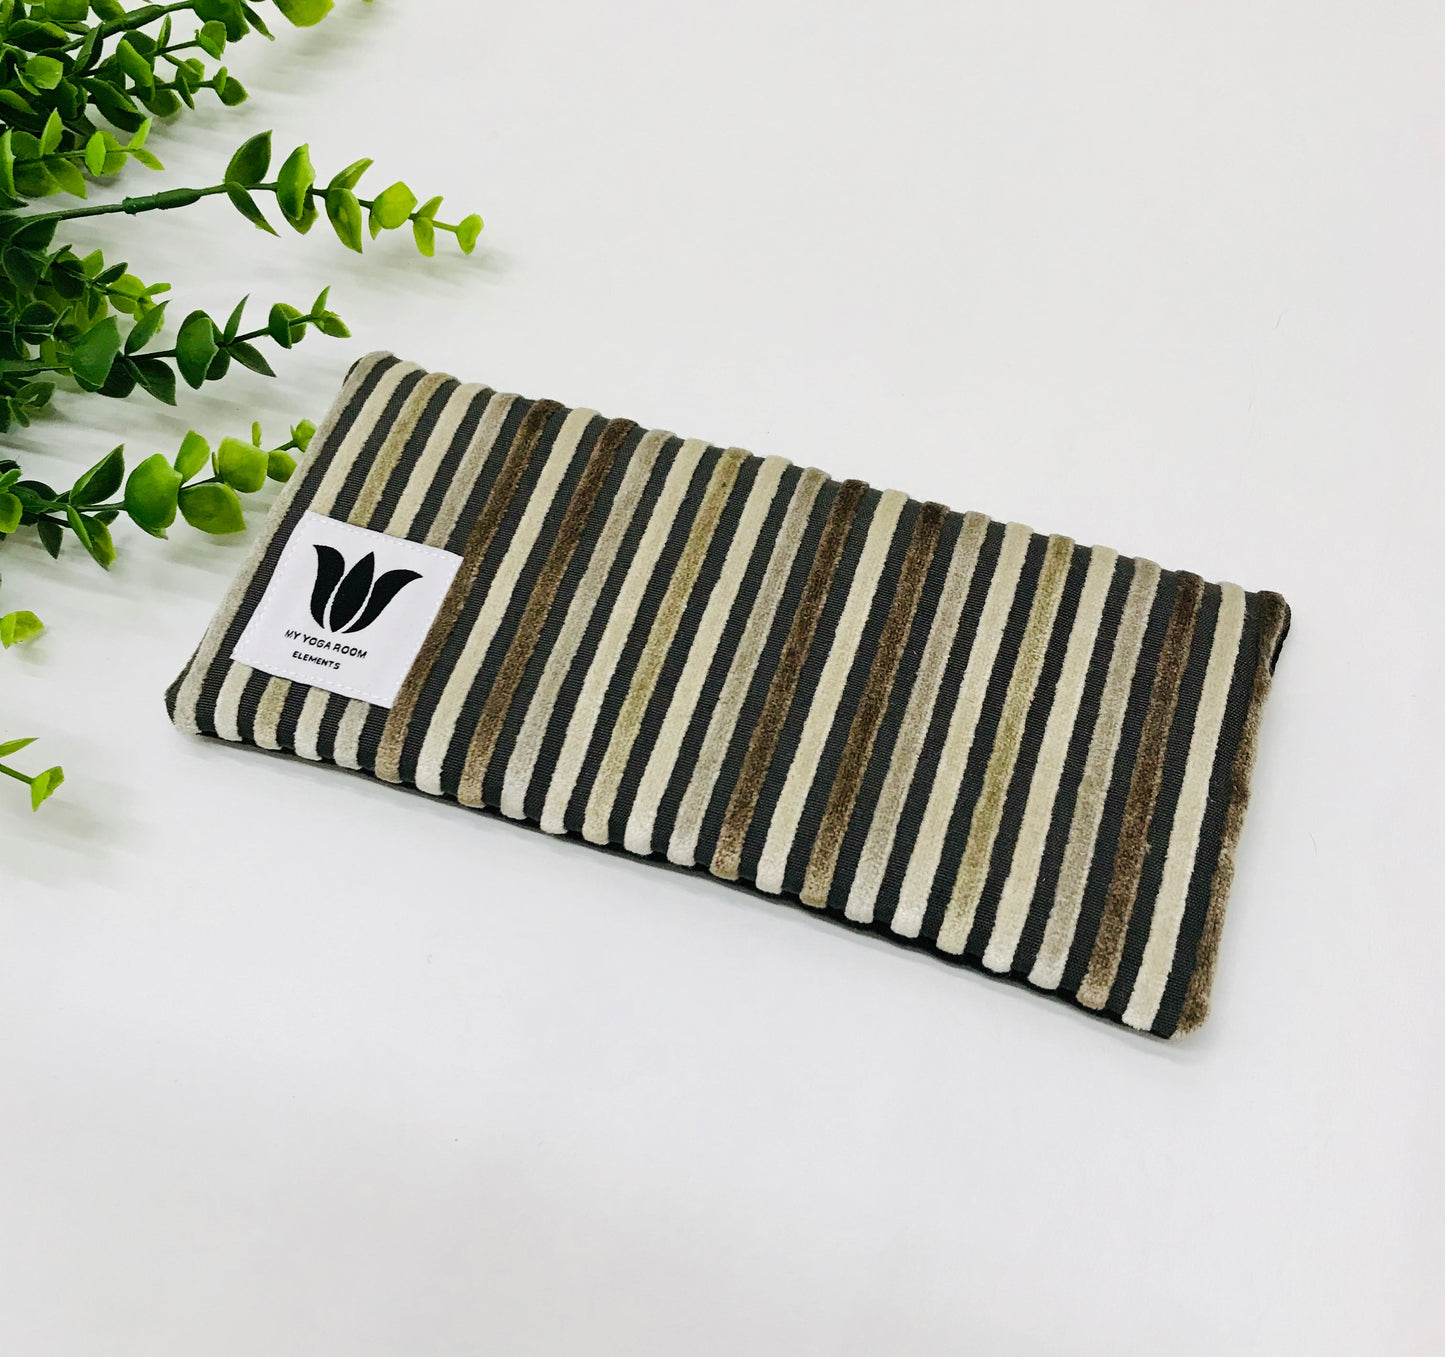 Yoga eye pillow, unscented, therapeutically weighted to soothe eye strain and stress or enhance your savasana. Handcrafted in Canada by My Yoga Room Elements. Brown plush stripe print and bamboo fabric.